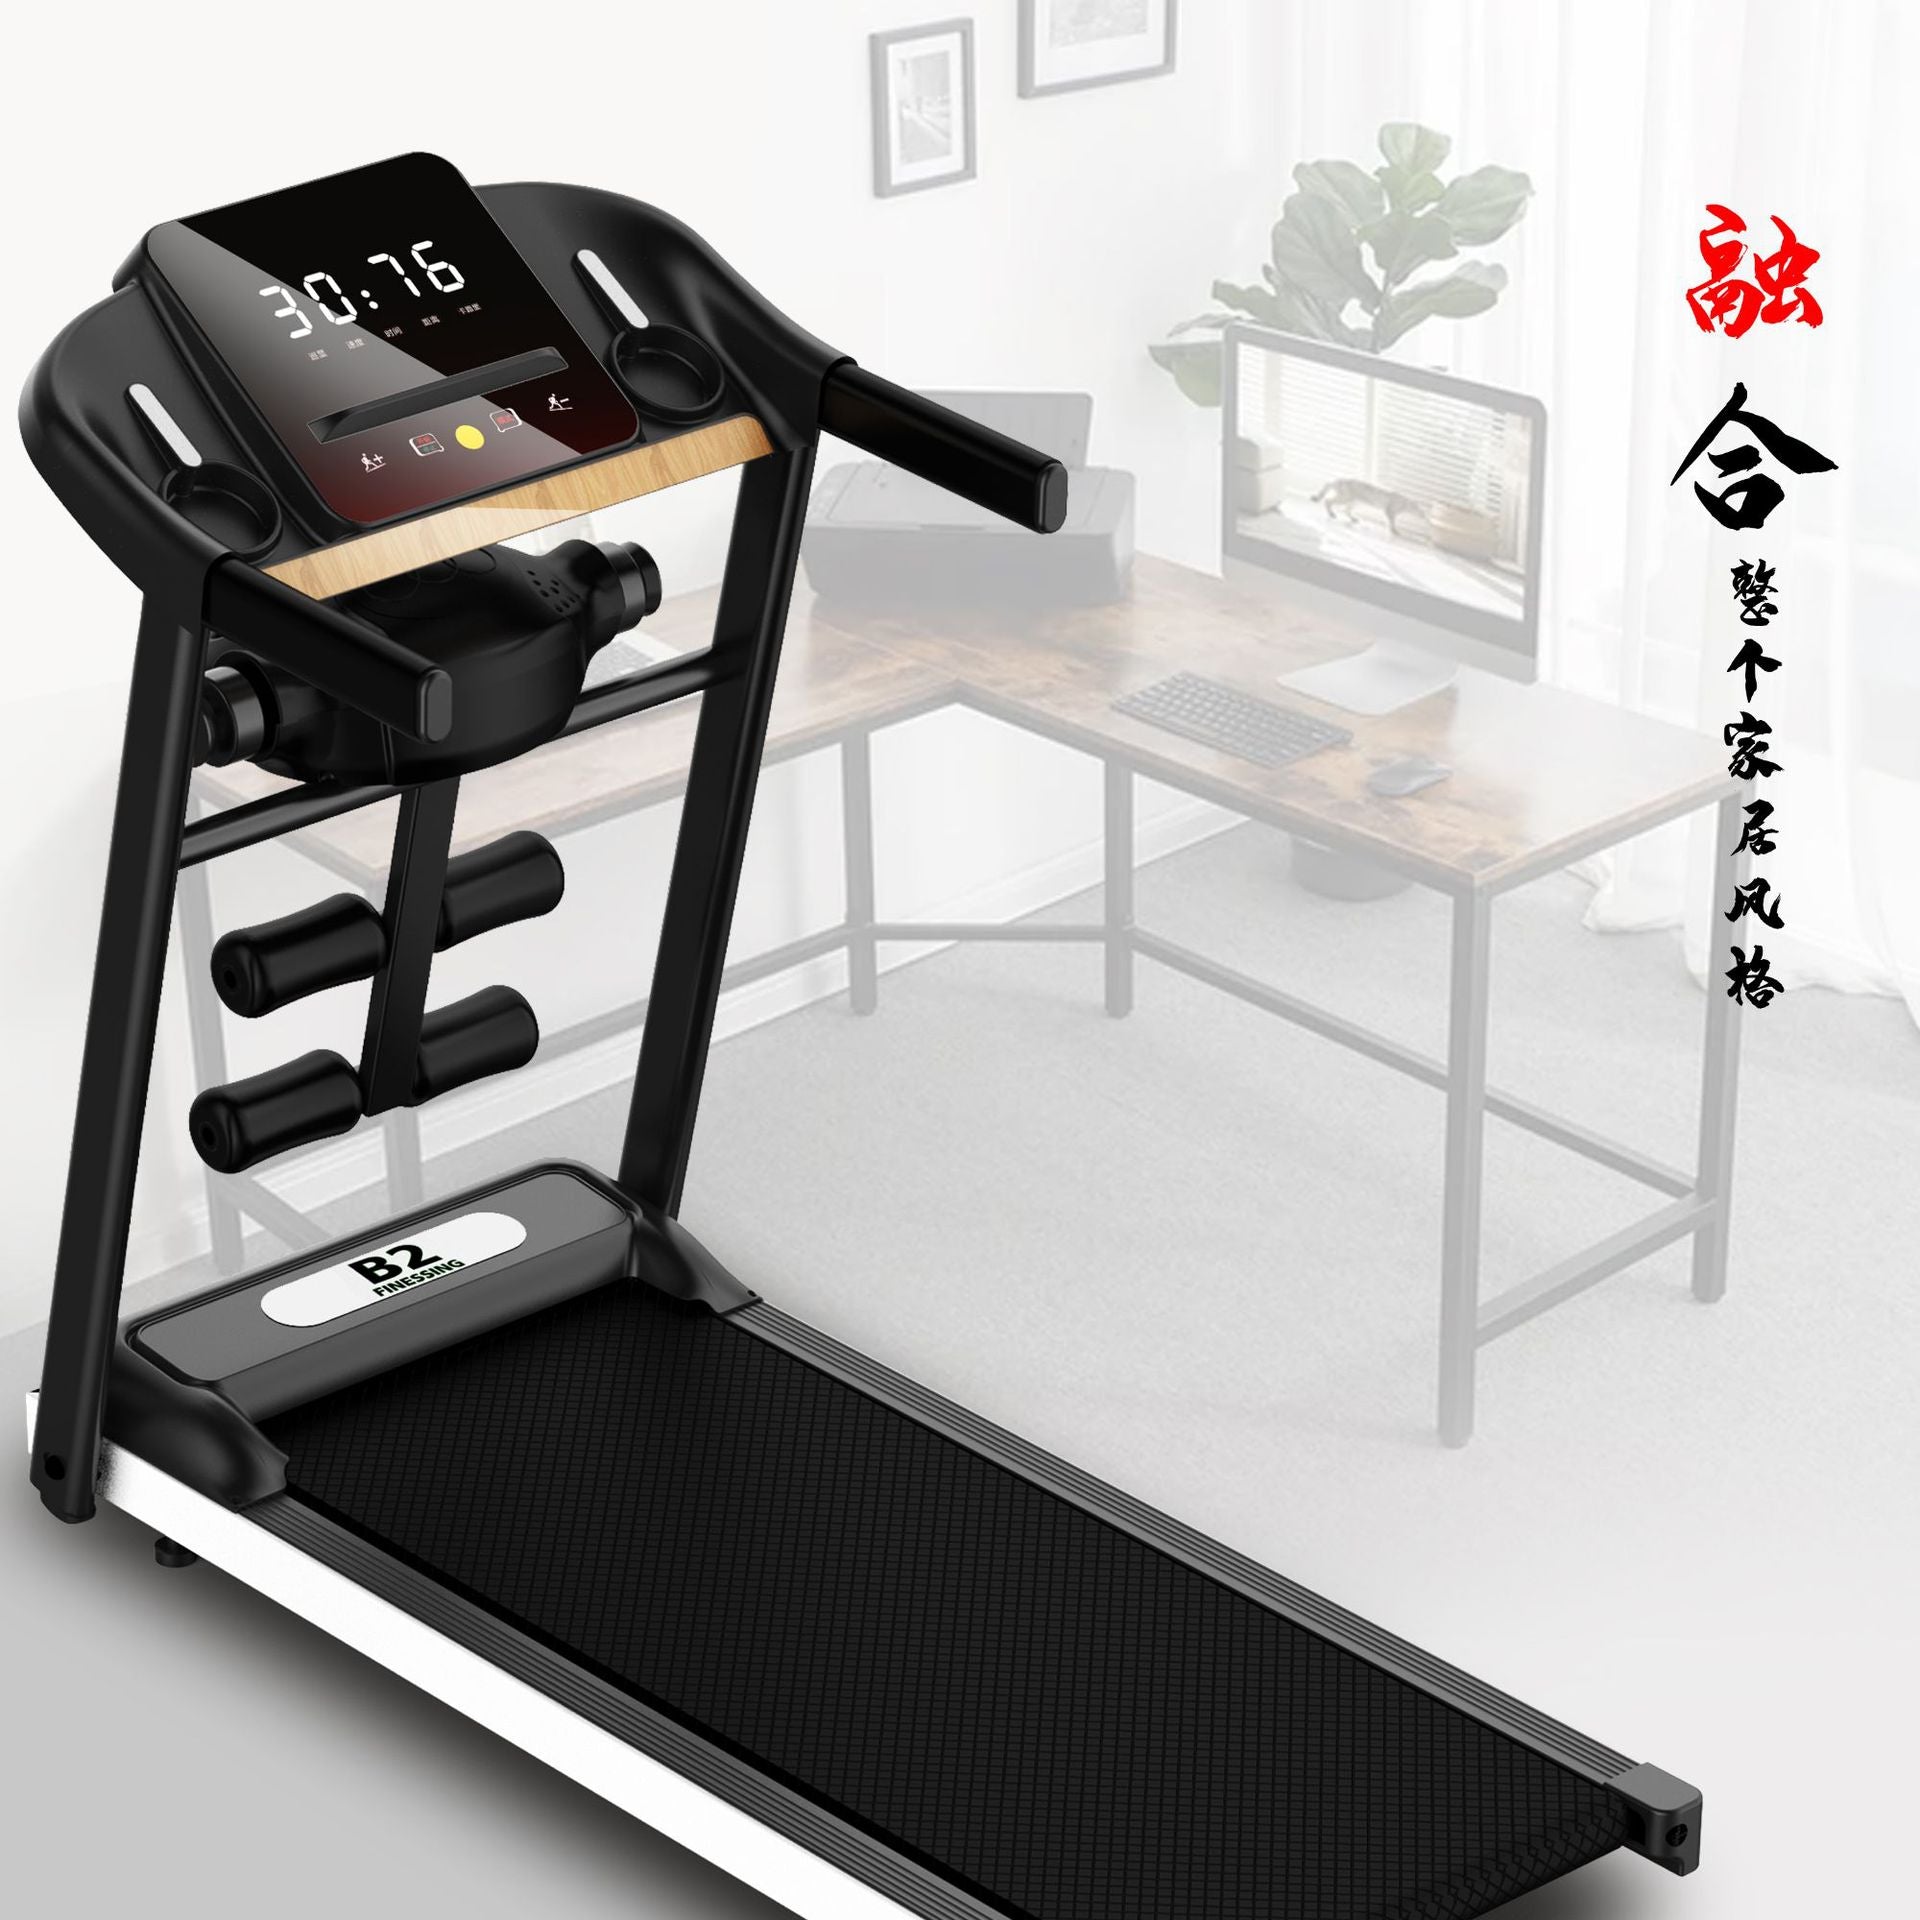 Balerz Foldable Electric Treadmill Folding Silent Running Training Treadmills Indoor Fitness Equipment Exercise Machine Sports for Home